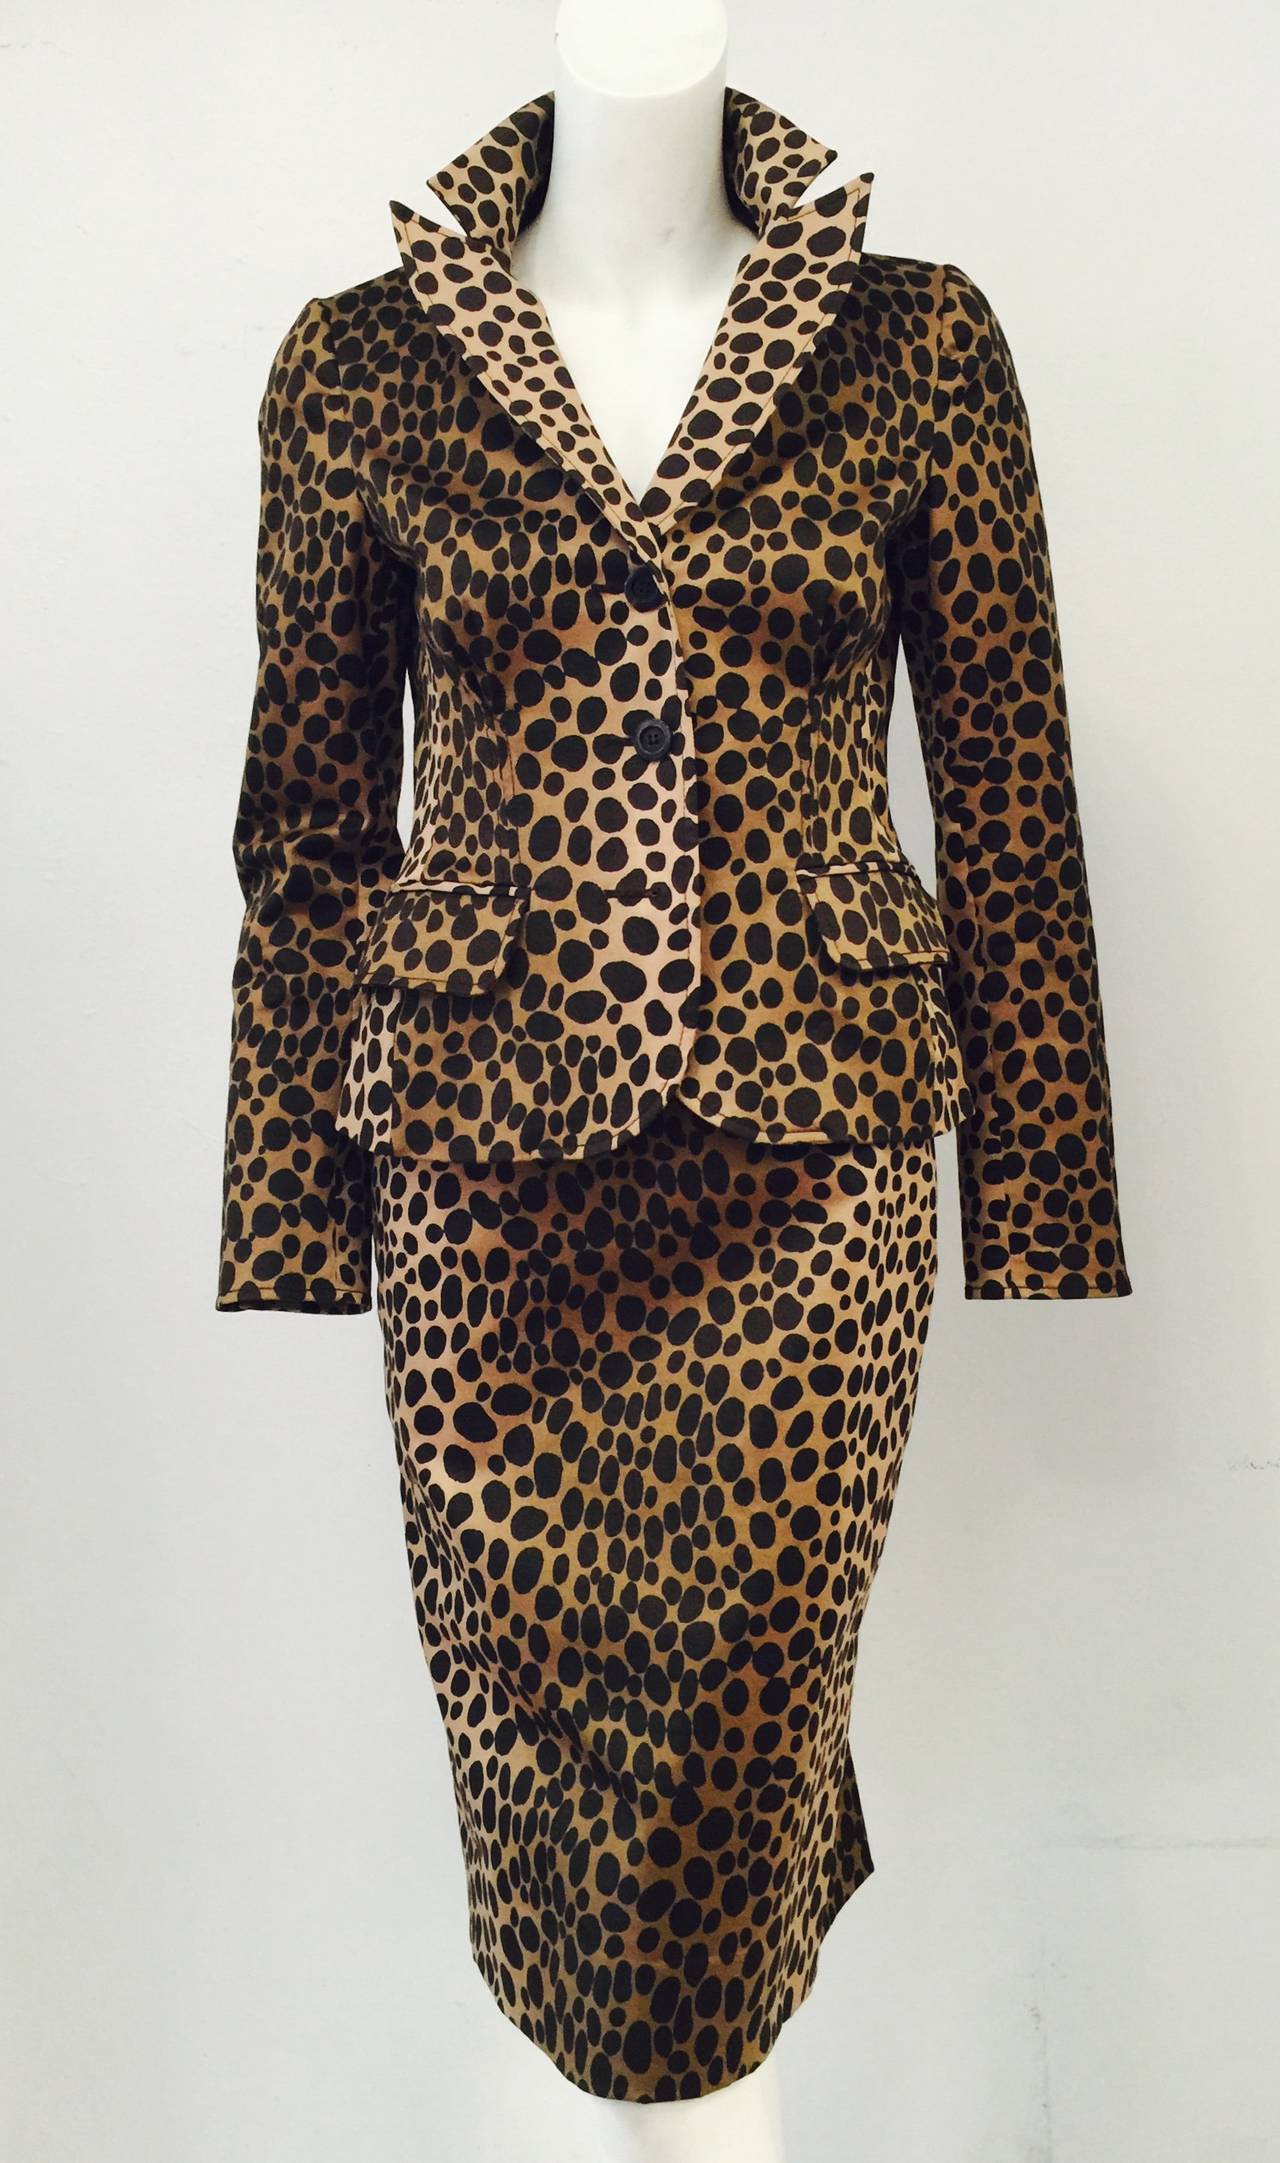 Magnificent Moschino Cheap and Chic Cotton Stretch Leopard Print Skirt ...